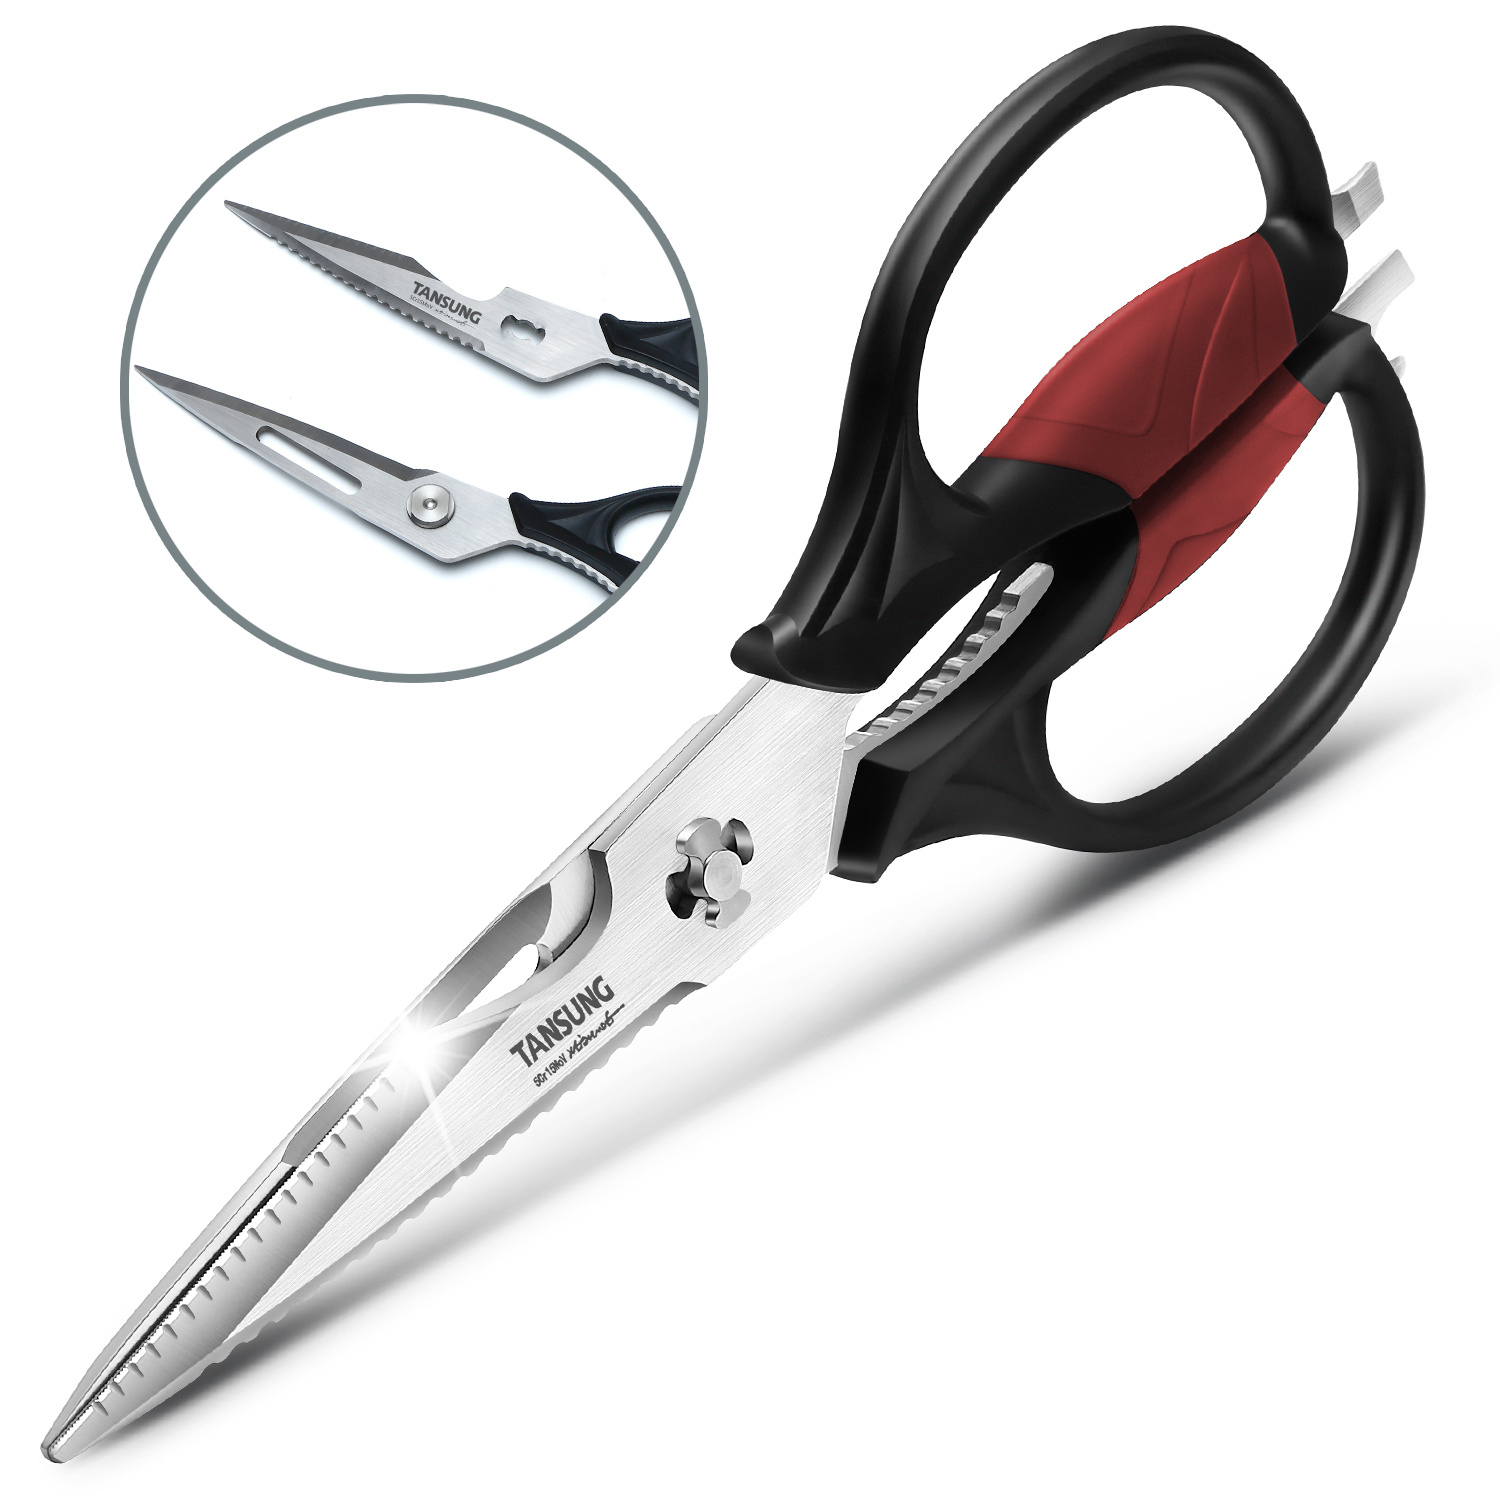 Heavy Duty Kitchen Scissors TANSUNG, Multifunction Kitchen Shears for  Poultry, Fish, Herb, Flowers - Sharp Blade Shears - Detachable for Easy to  Clean - Peeler, Bottle Opener (Black) by ‎TANSUNG - Shop